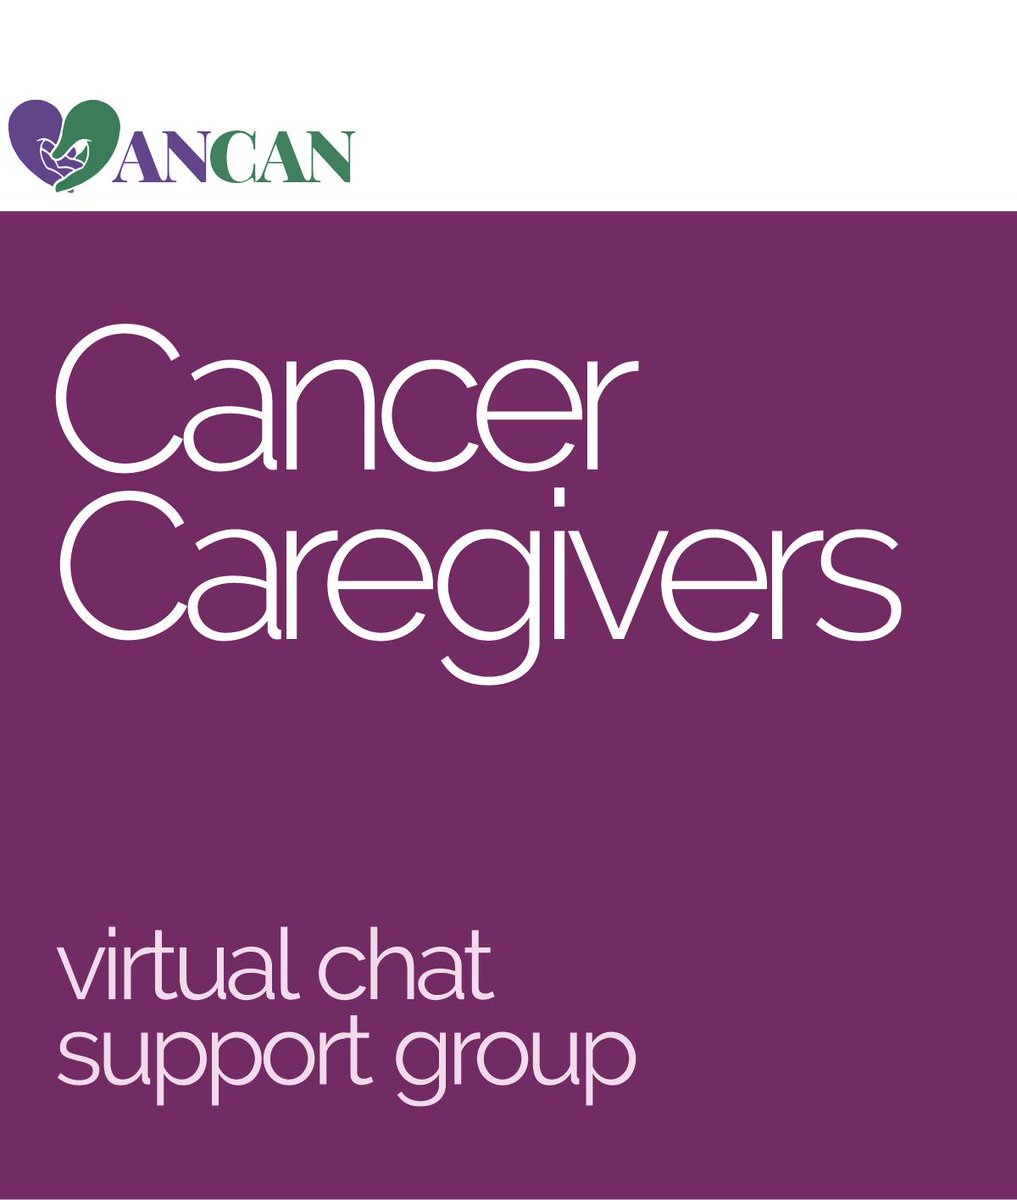 It's ok to feel what you're feeling. We're here to support the supporters of our loved ones with later-stage cancers. Join us on the 1st & 3rd Tuesdays at 8 pm EST for our virtual support group: ancan.org/venue/goto-mee… #caregiver #cancercaregiver #cancersupport #cancercare